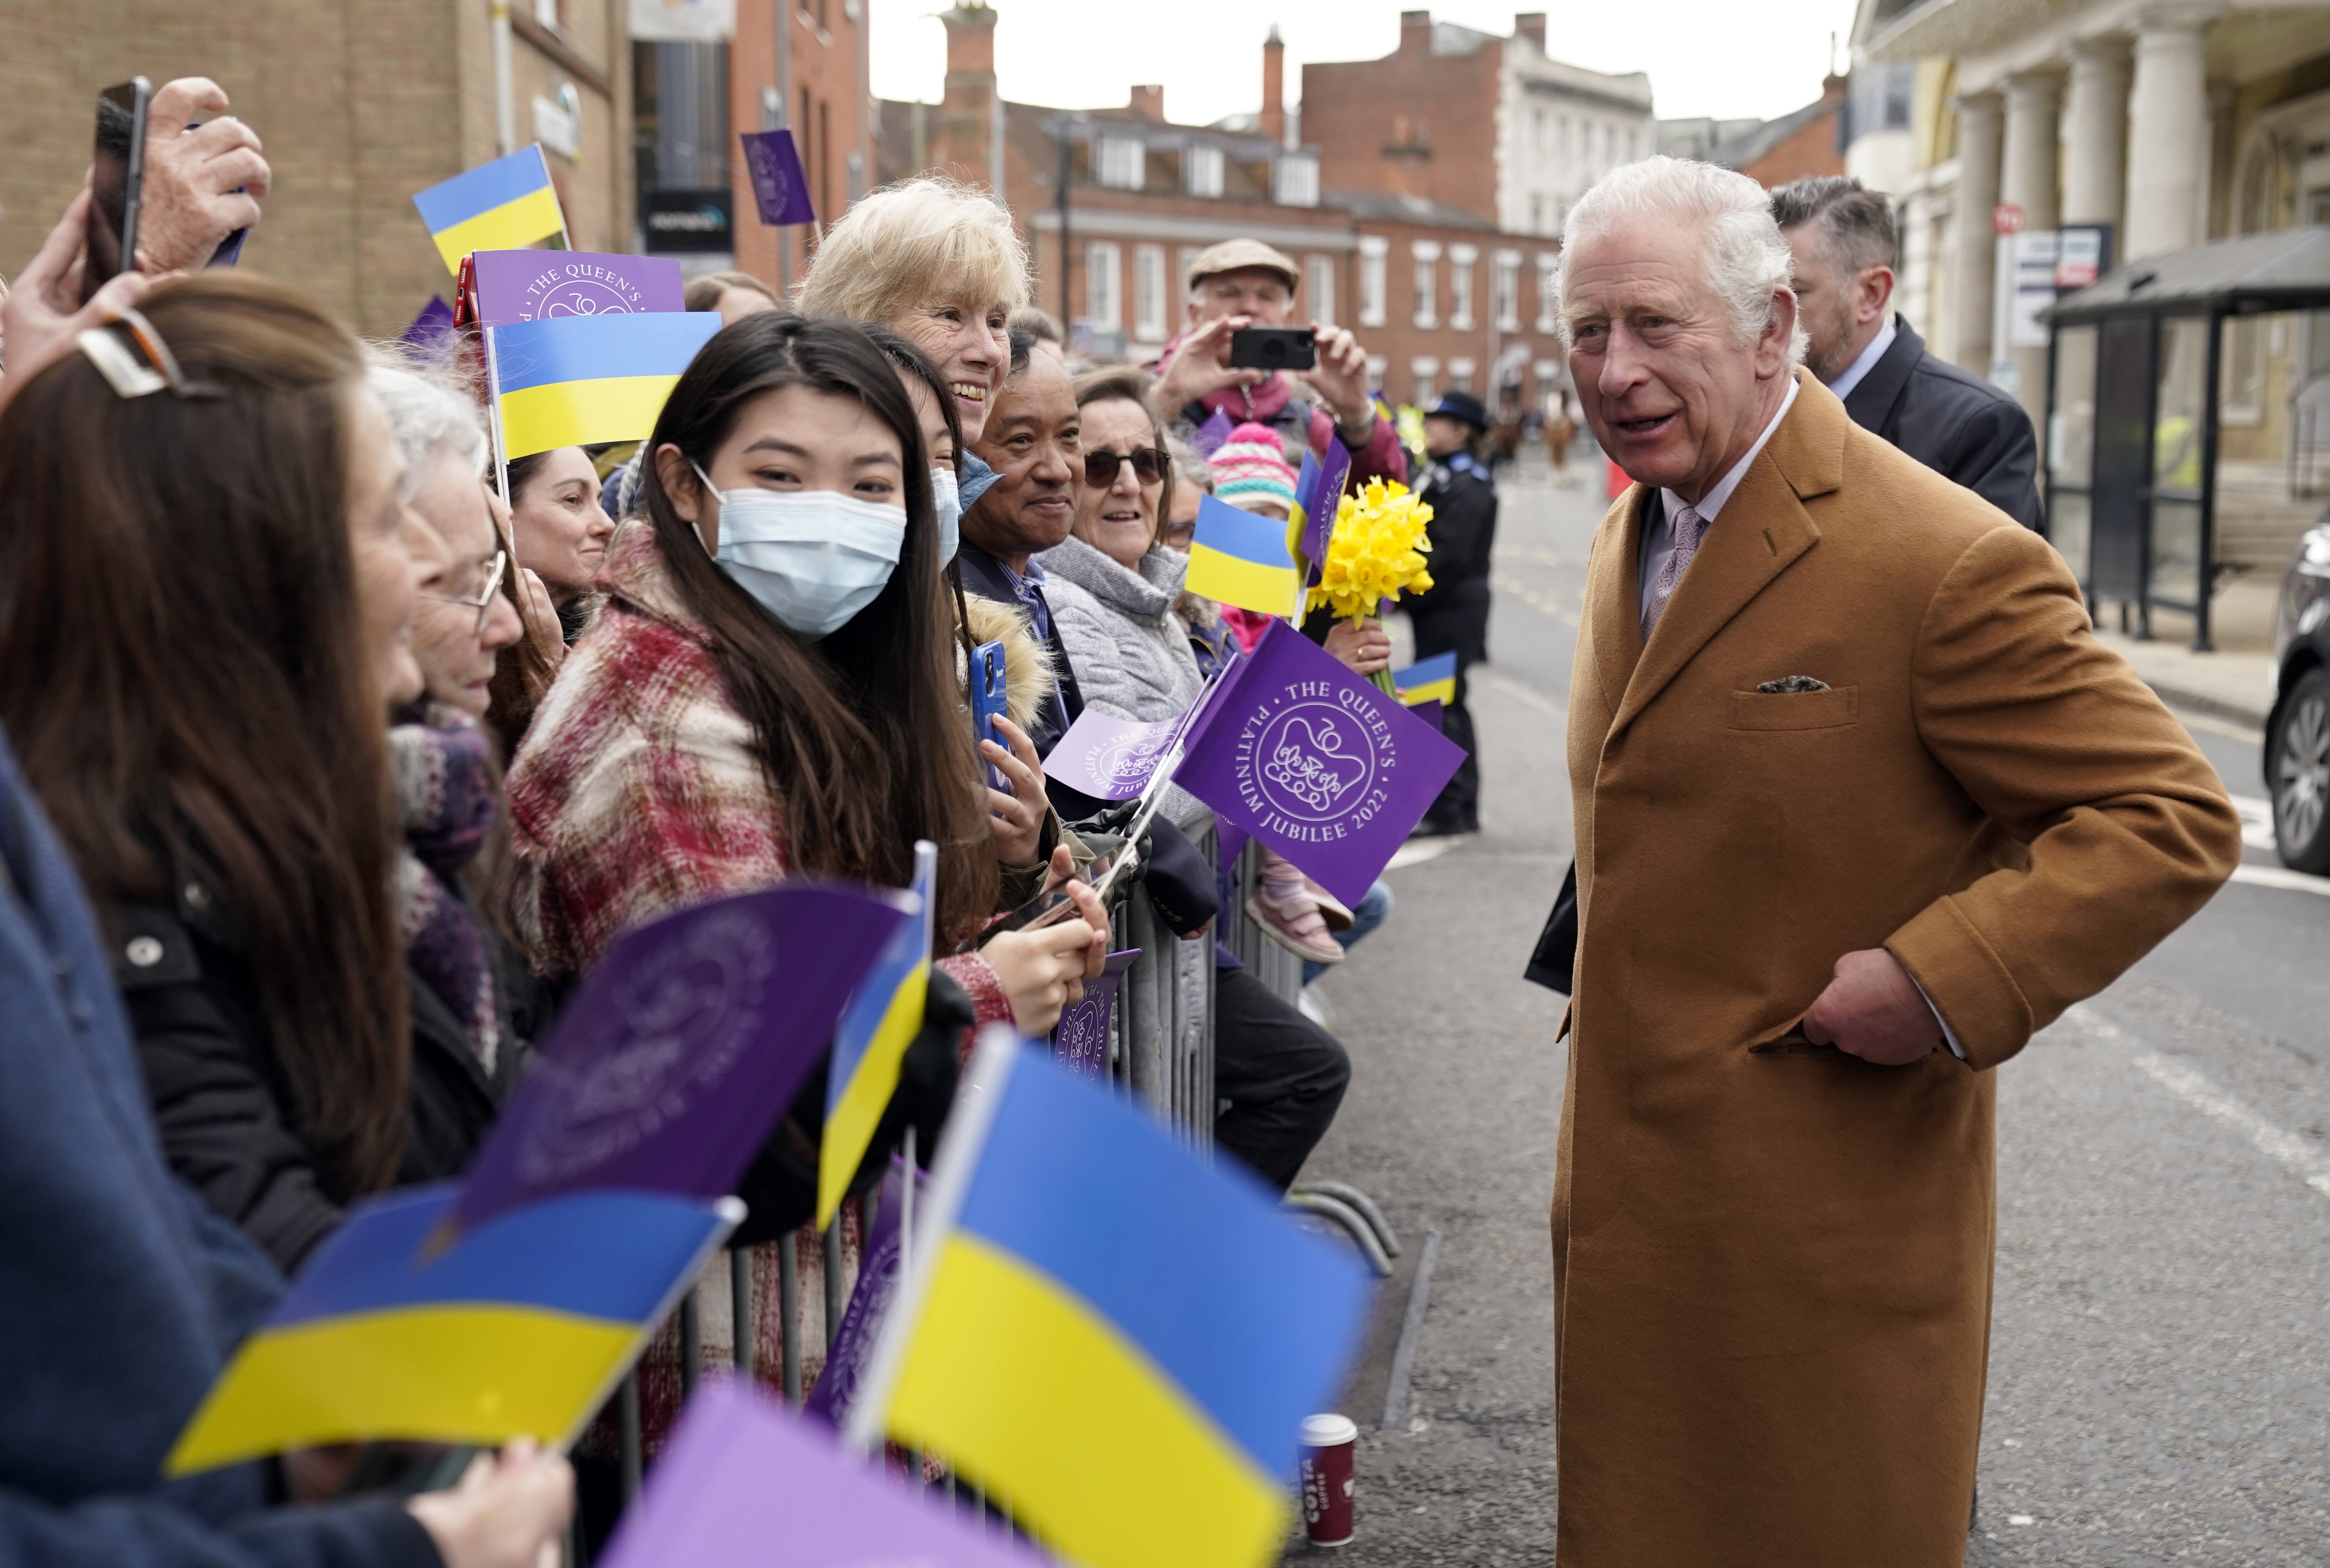 The Prince of Wales meets members of the public during a visit to Winchester (Andrew Matthews/PA)